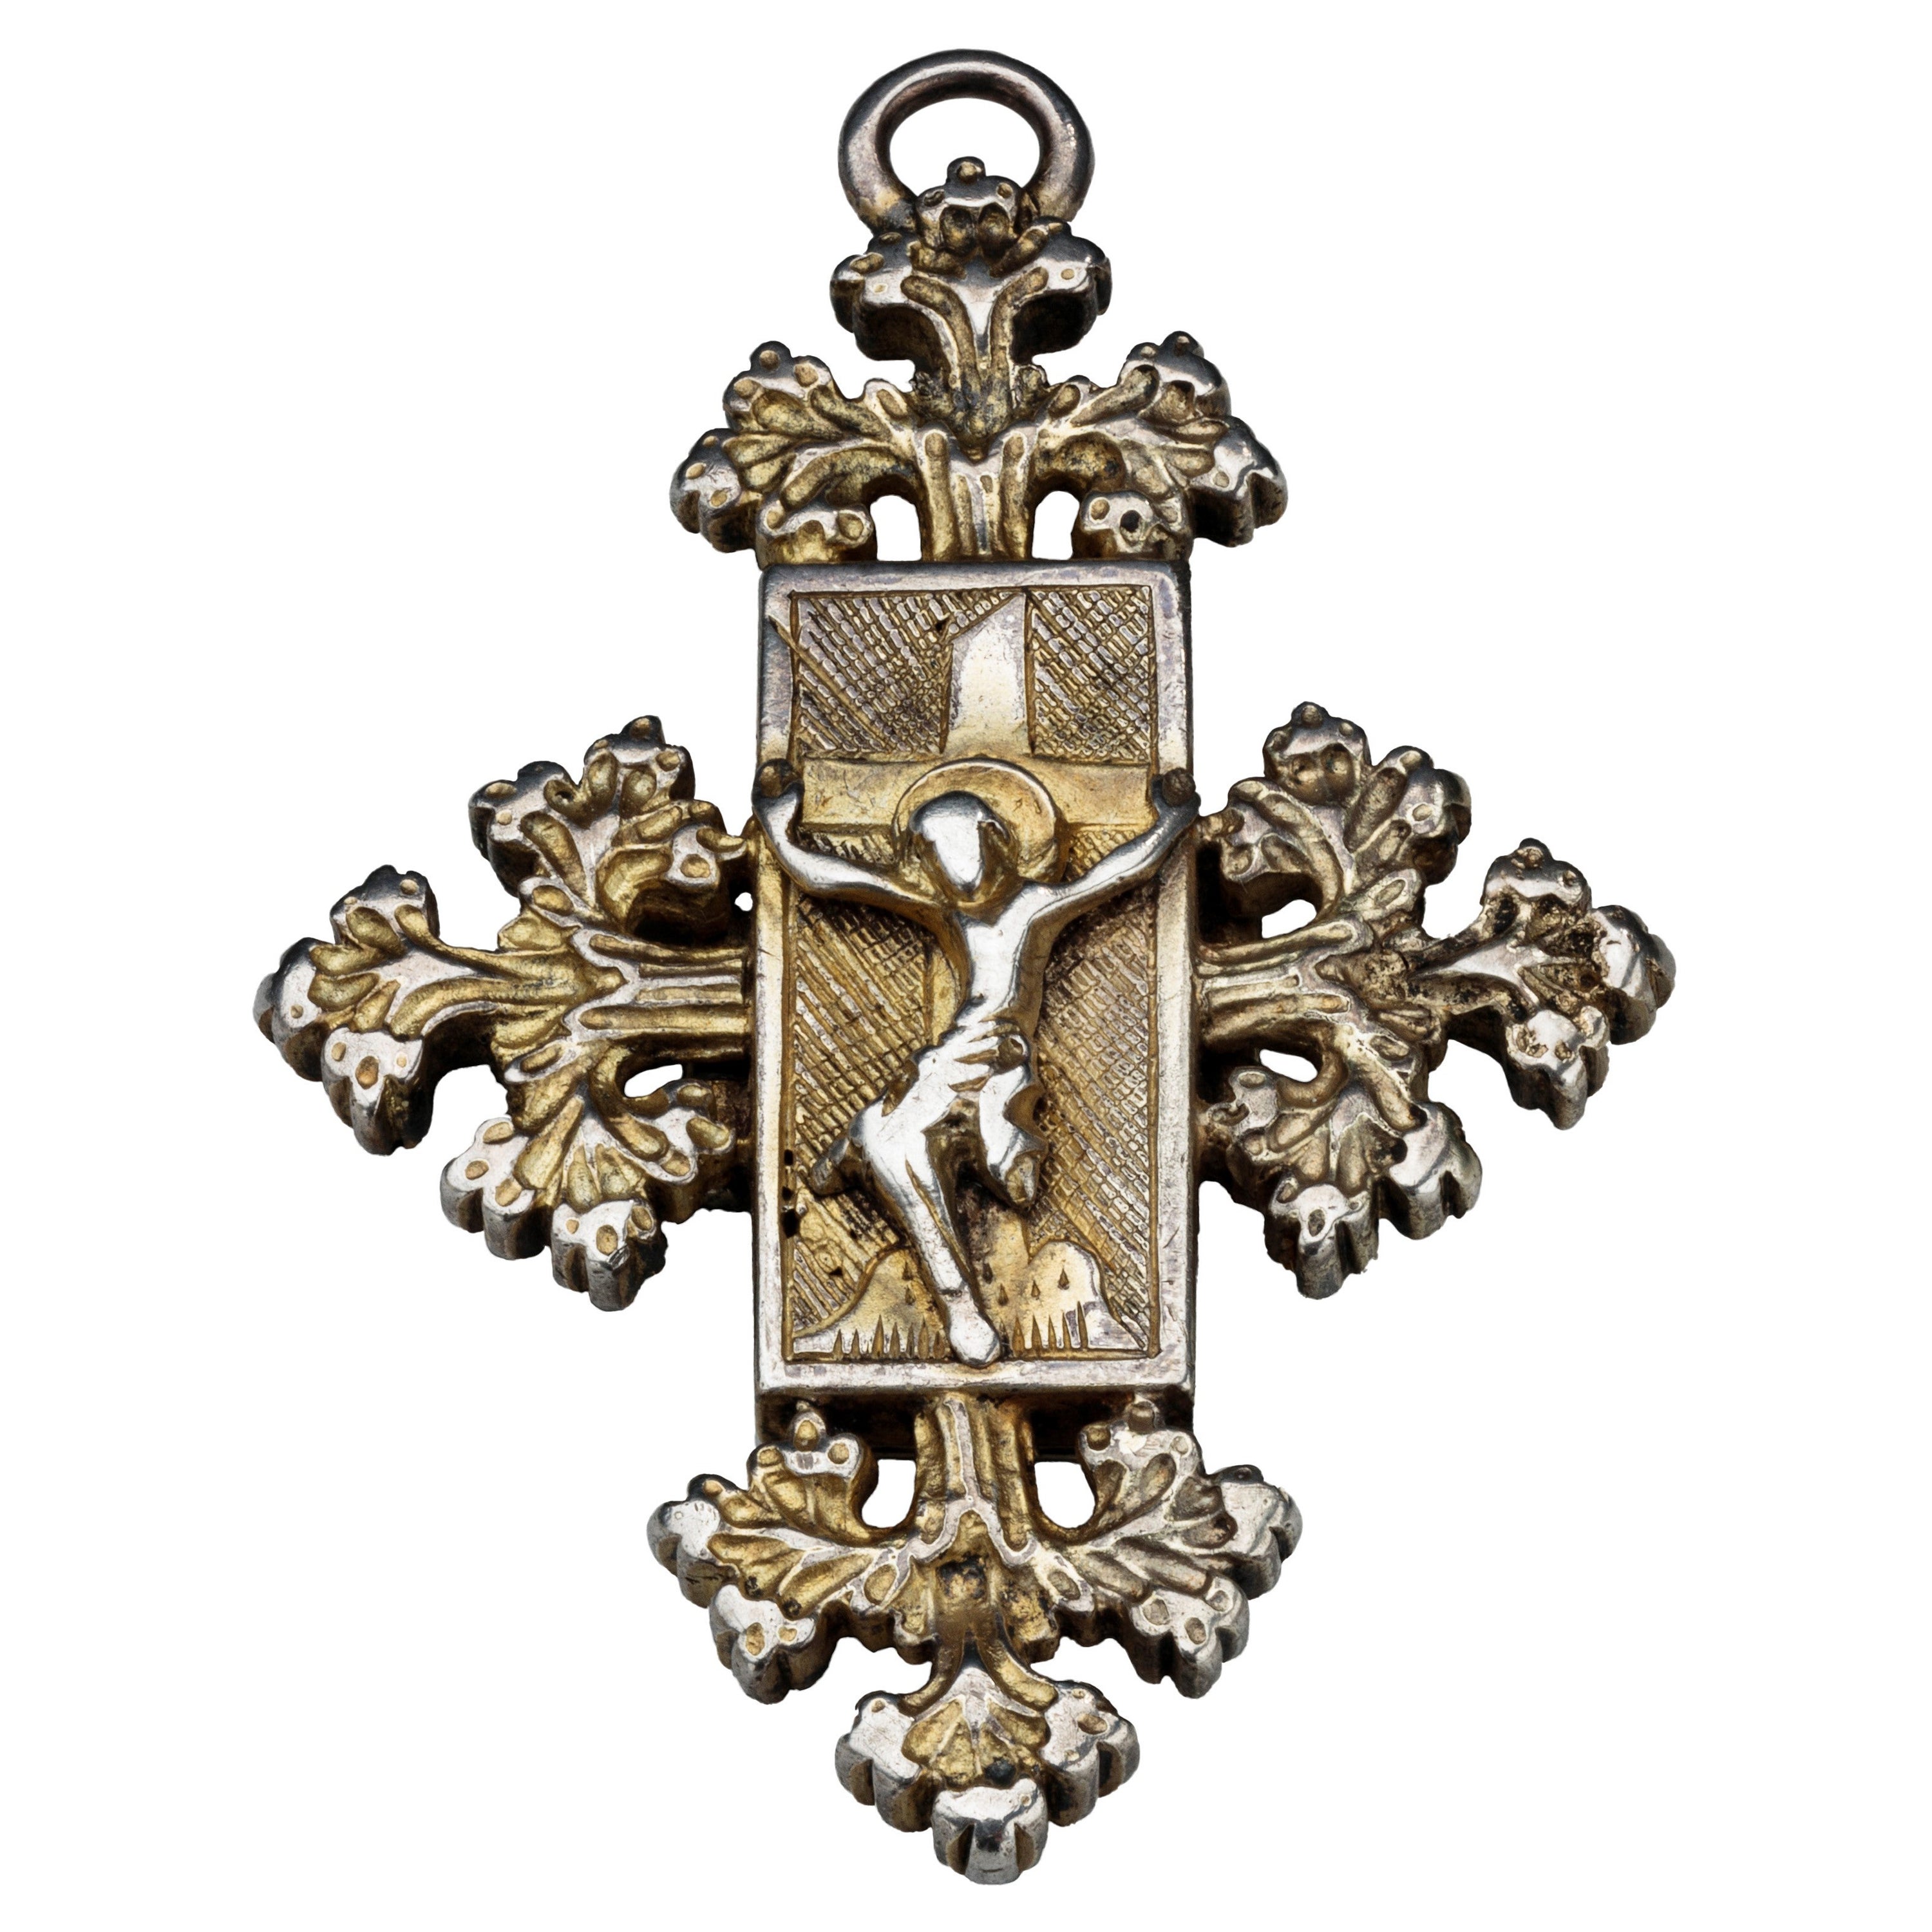 Fifteenth Century Reliquary Pendant with Christ on the Cross